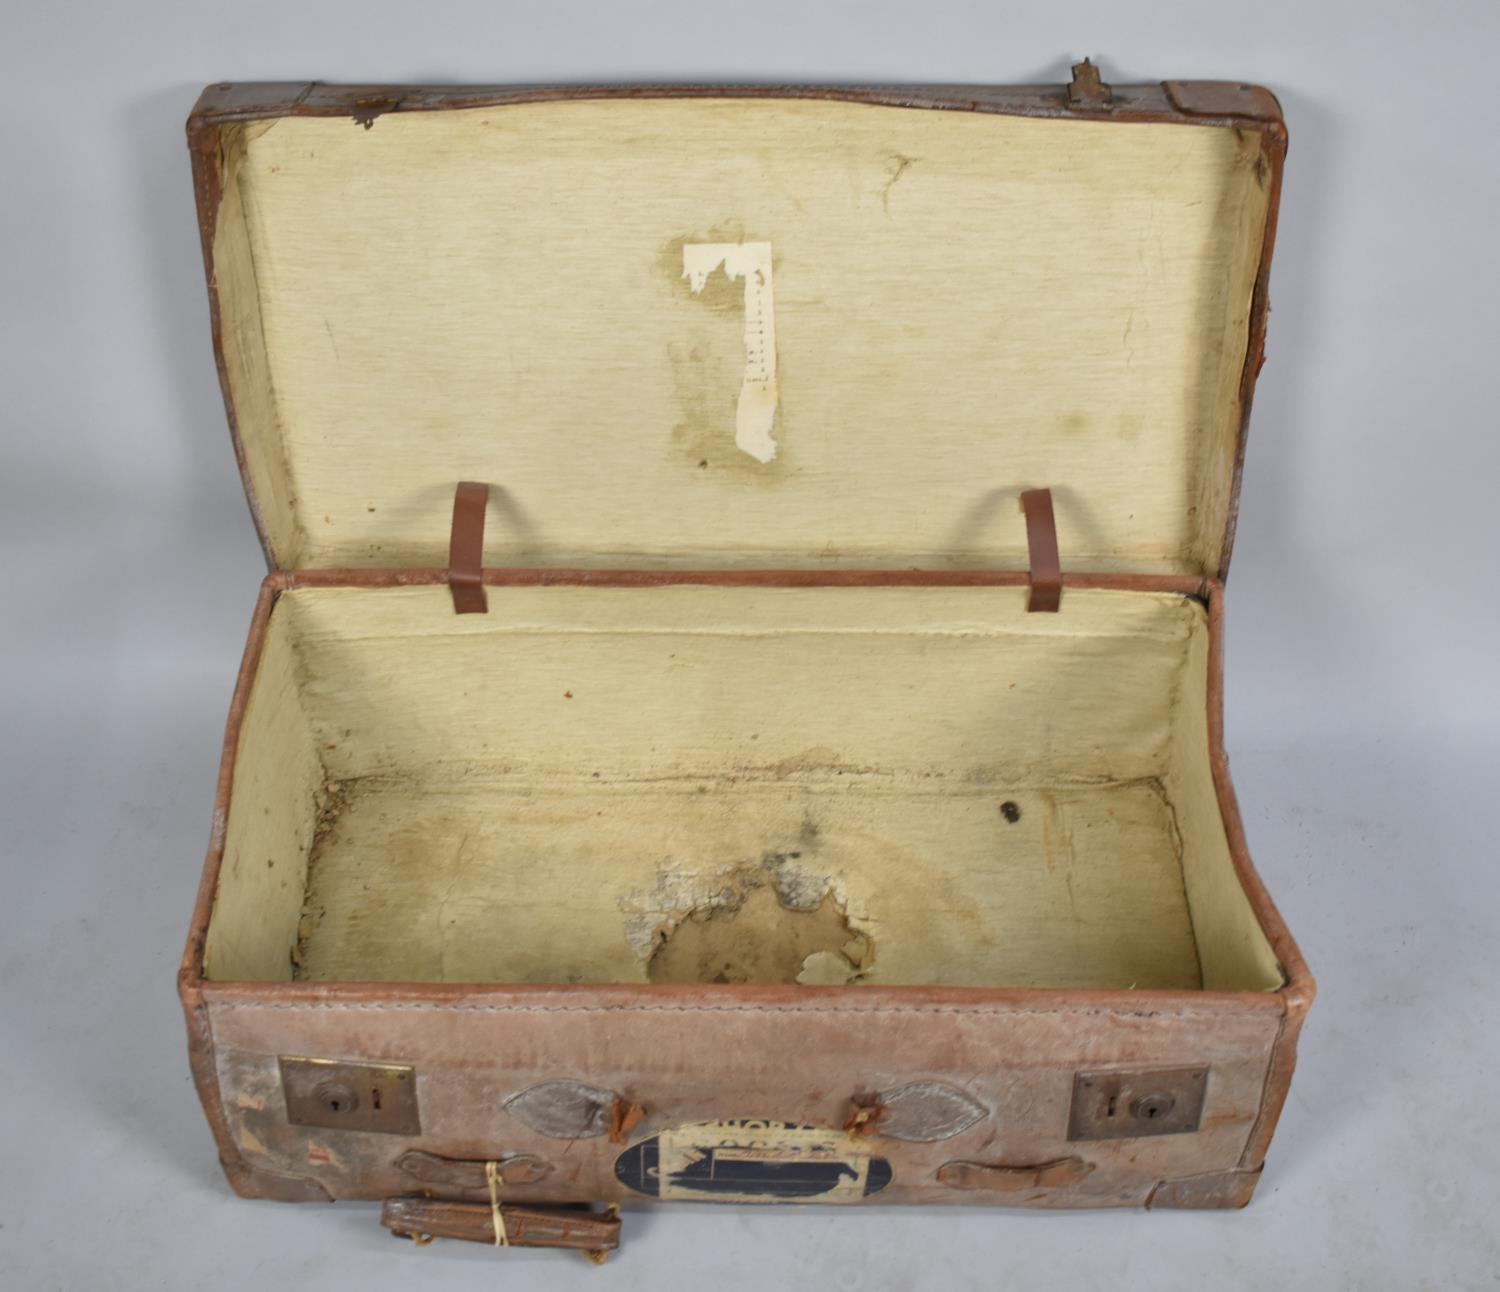 Two Vintage Travelling Cases - Image 3 of 4